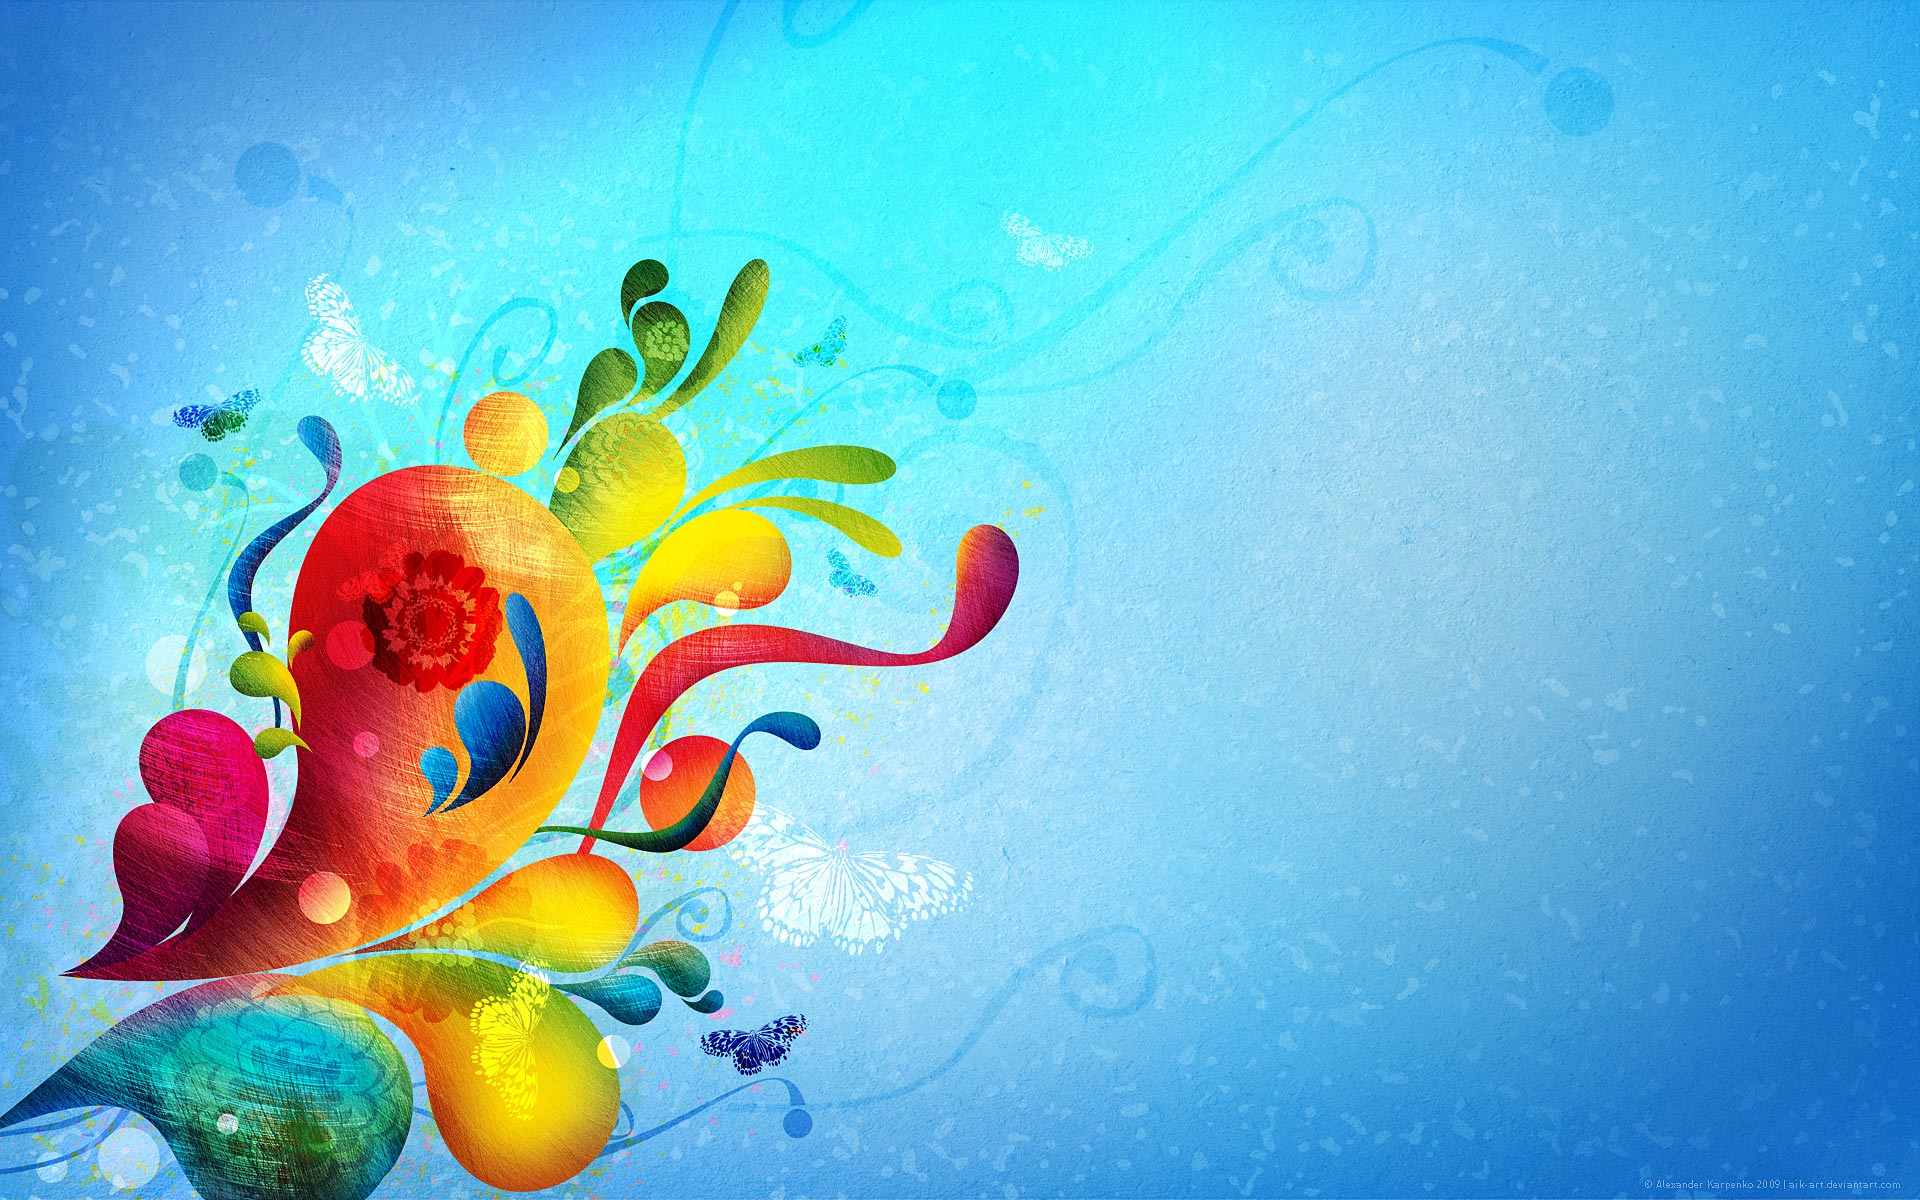 Collection of Graphic Art Wallpaper on HDWallpapers